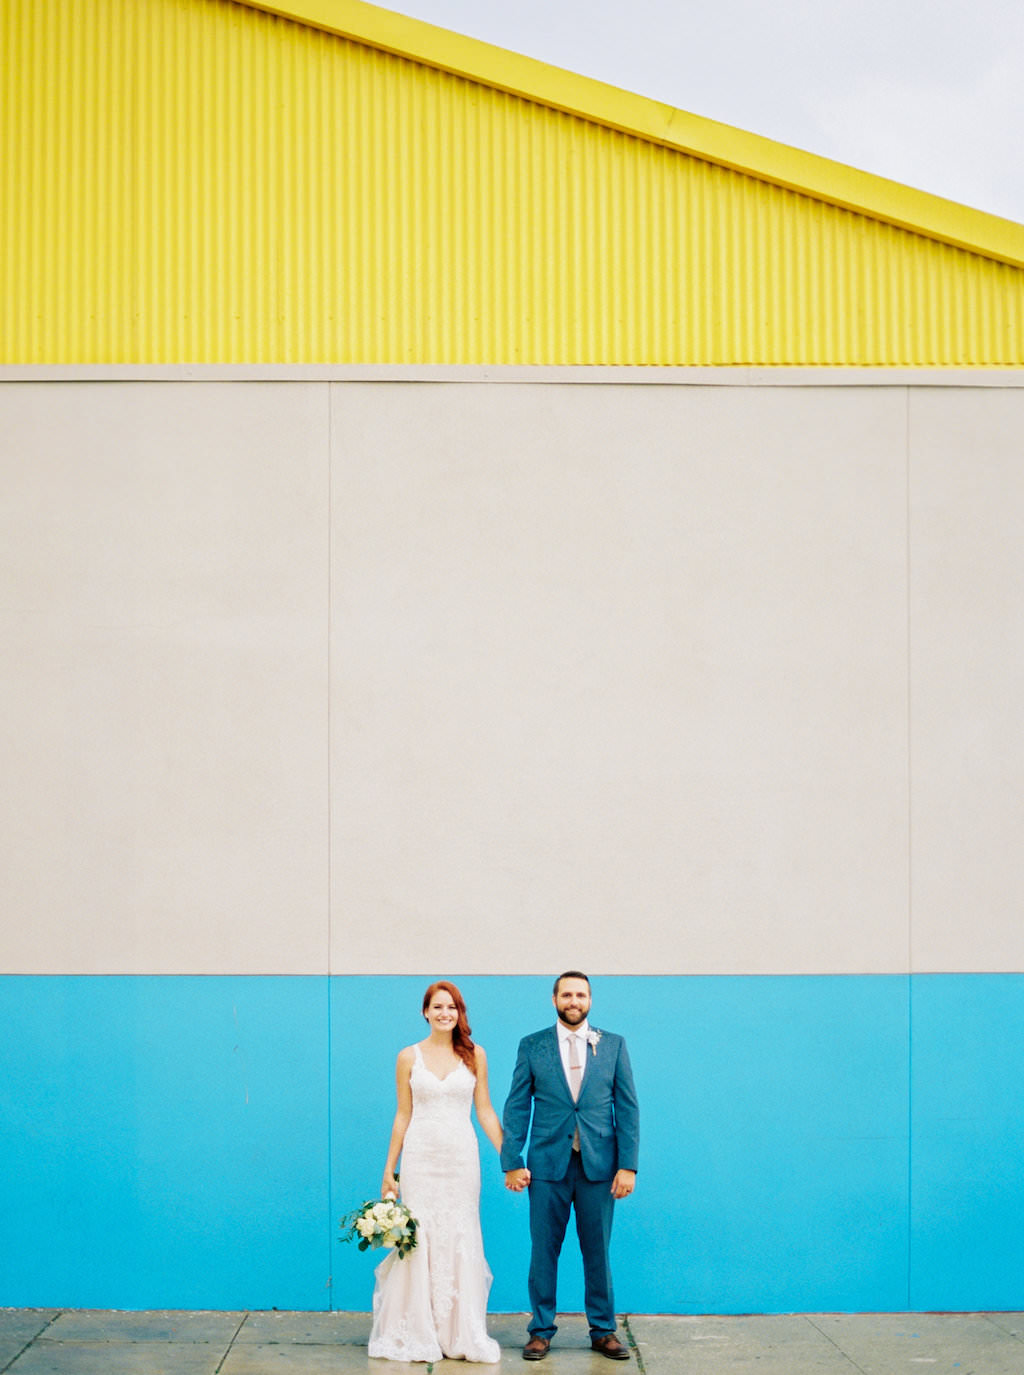 Downtown Tampa Creative Wedding Portrait, Bride in Sweetheart Lace Stella York Dress with White and Greenery Bouquet, Groom in Blue Suit | Wedding Planner Glitz Events